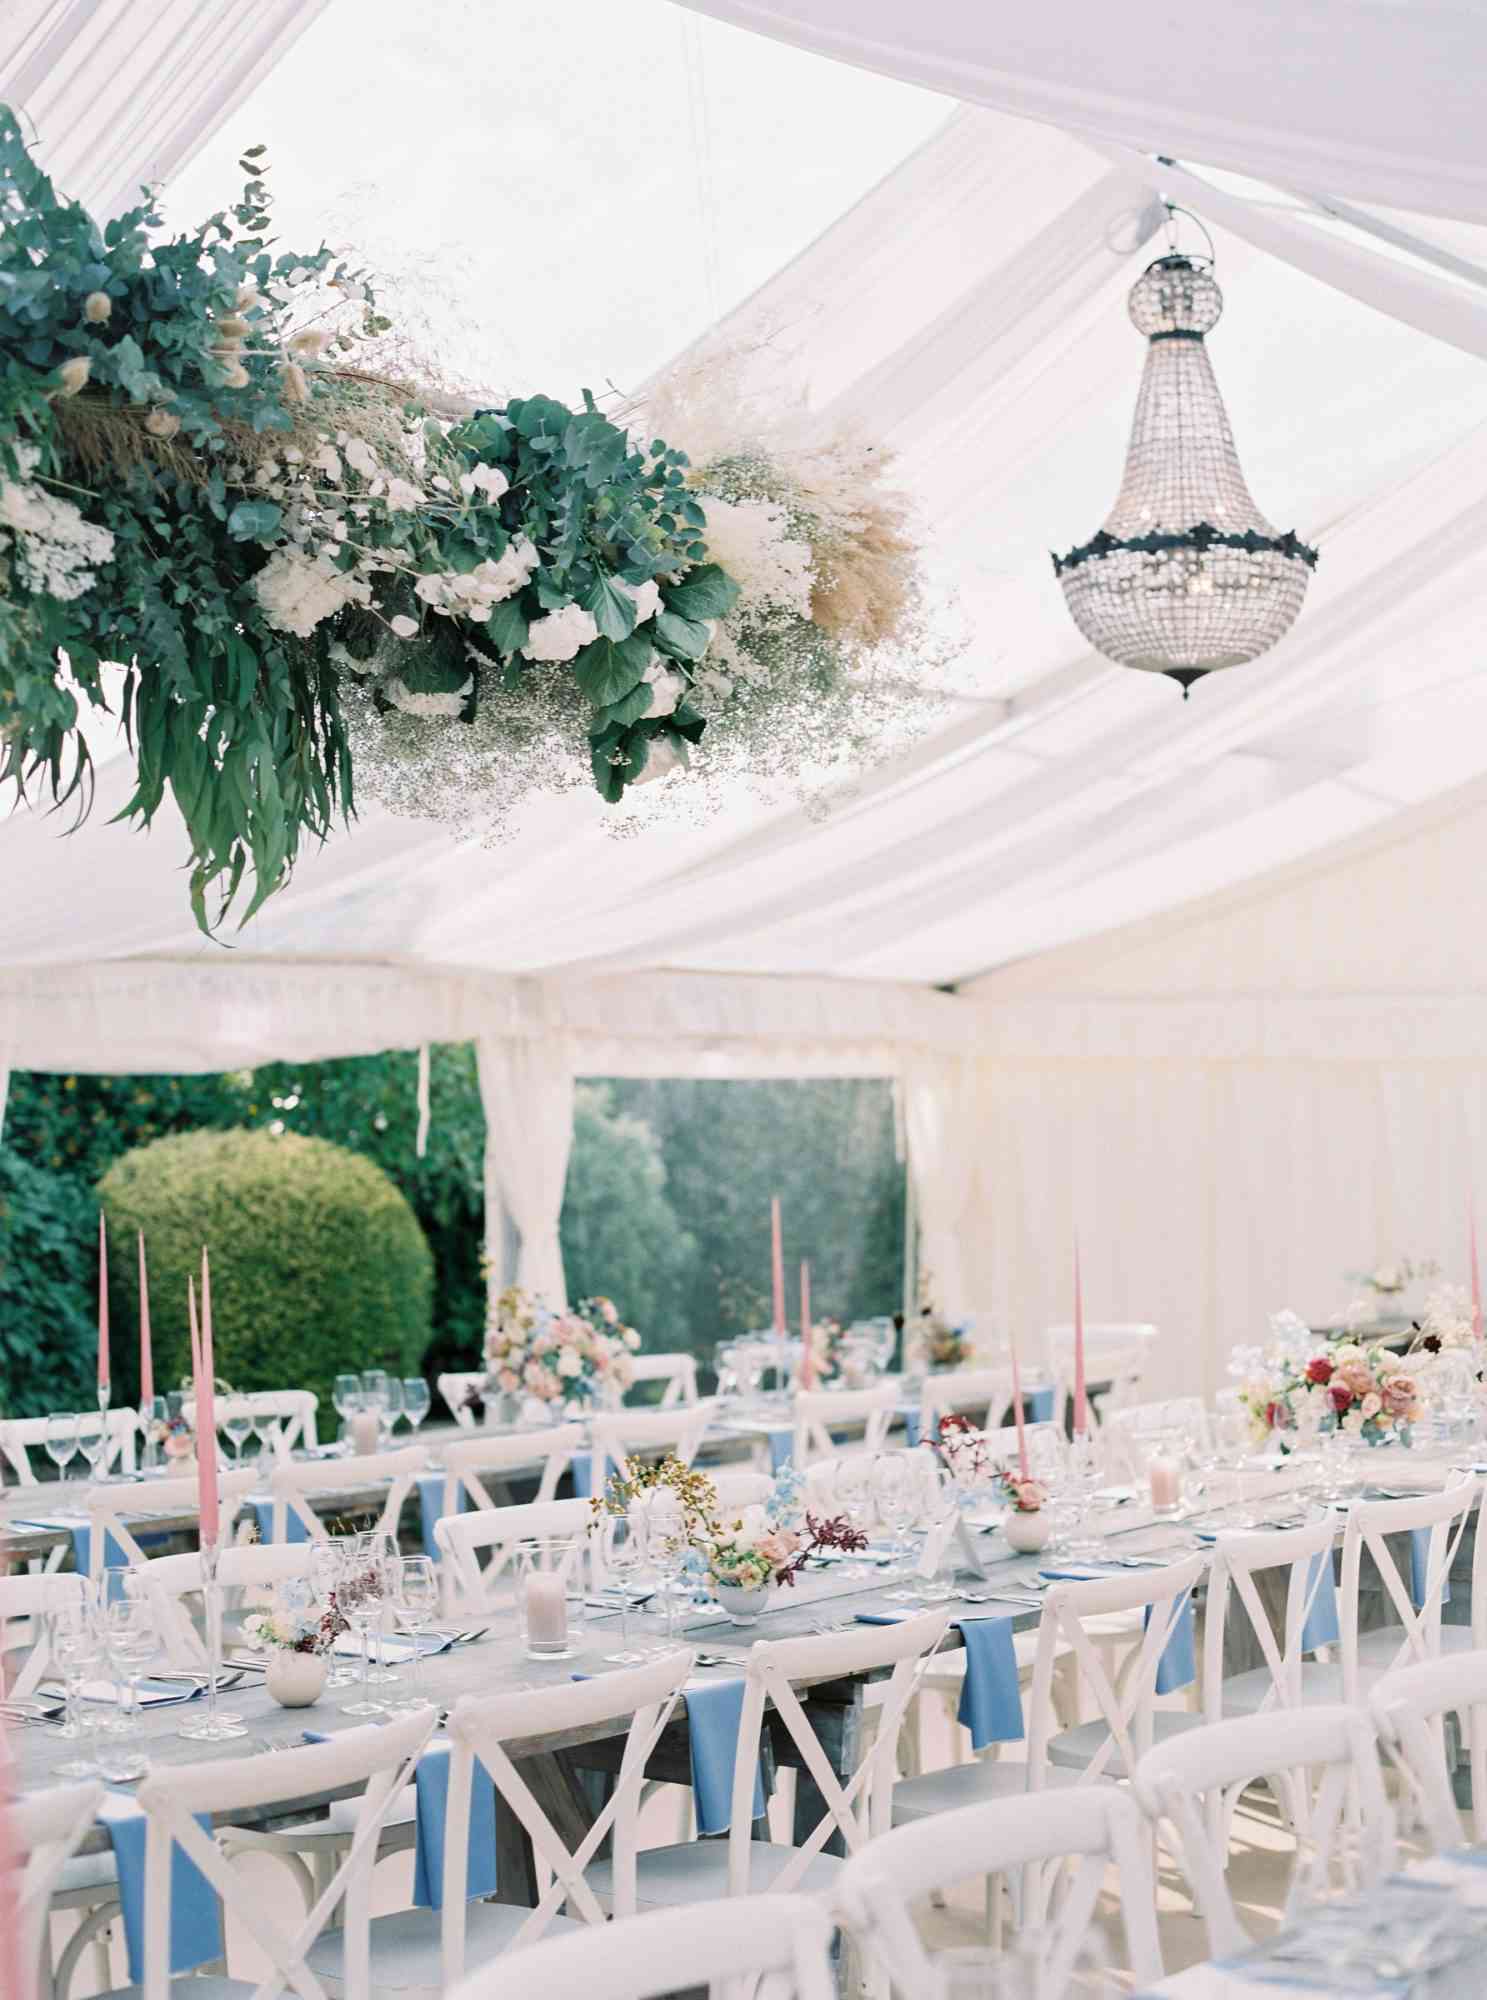 tented reception with long wooden tables, white chairs, chandeliers, and hanging floral arrangements